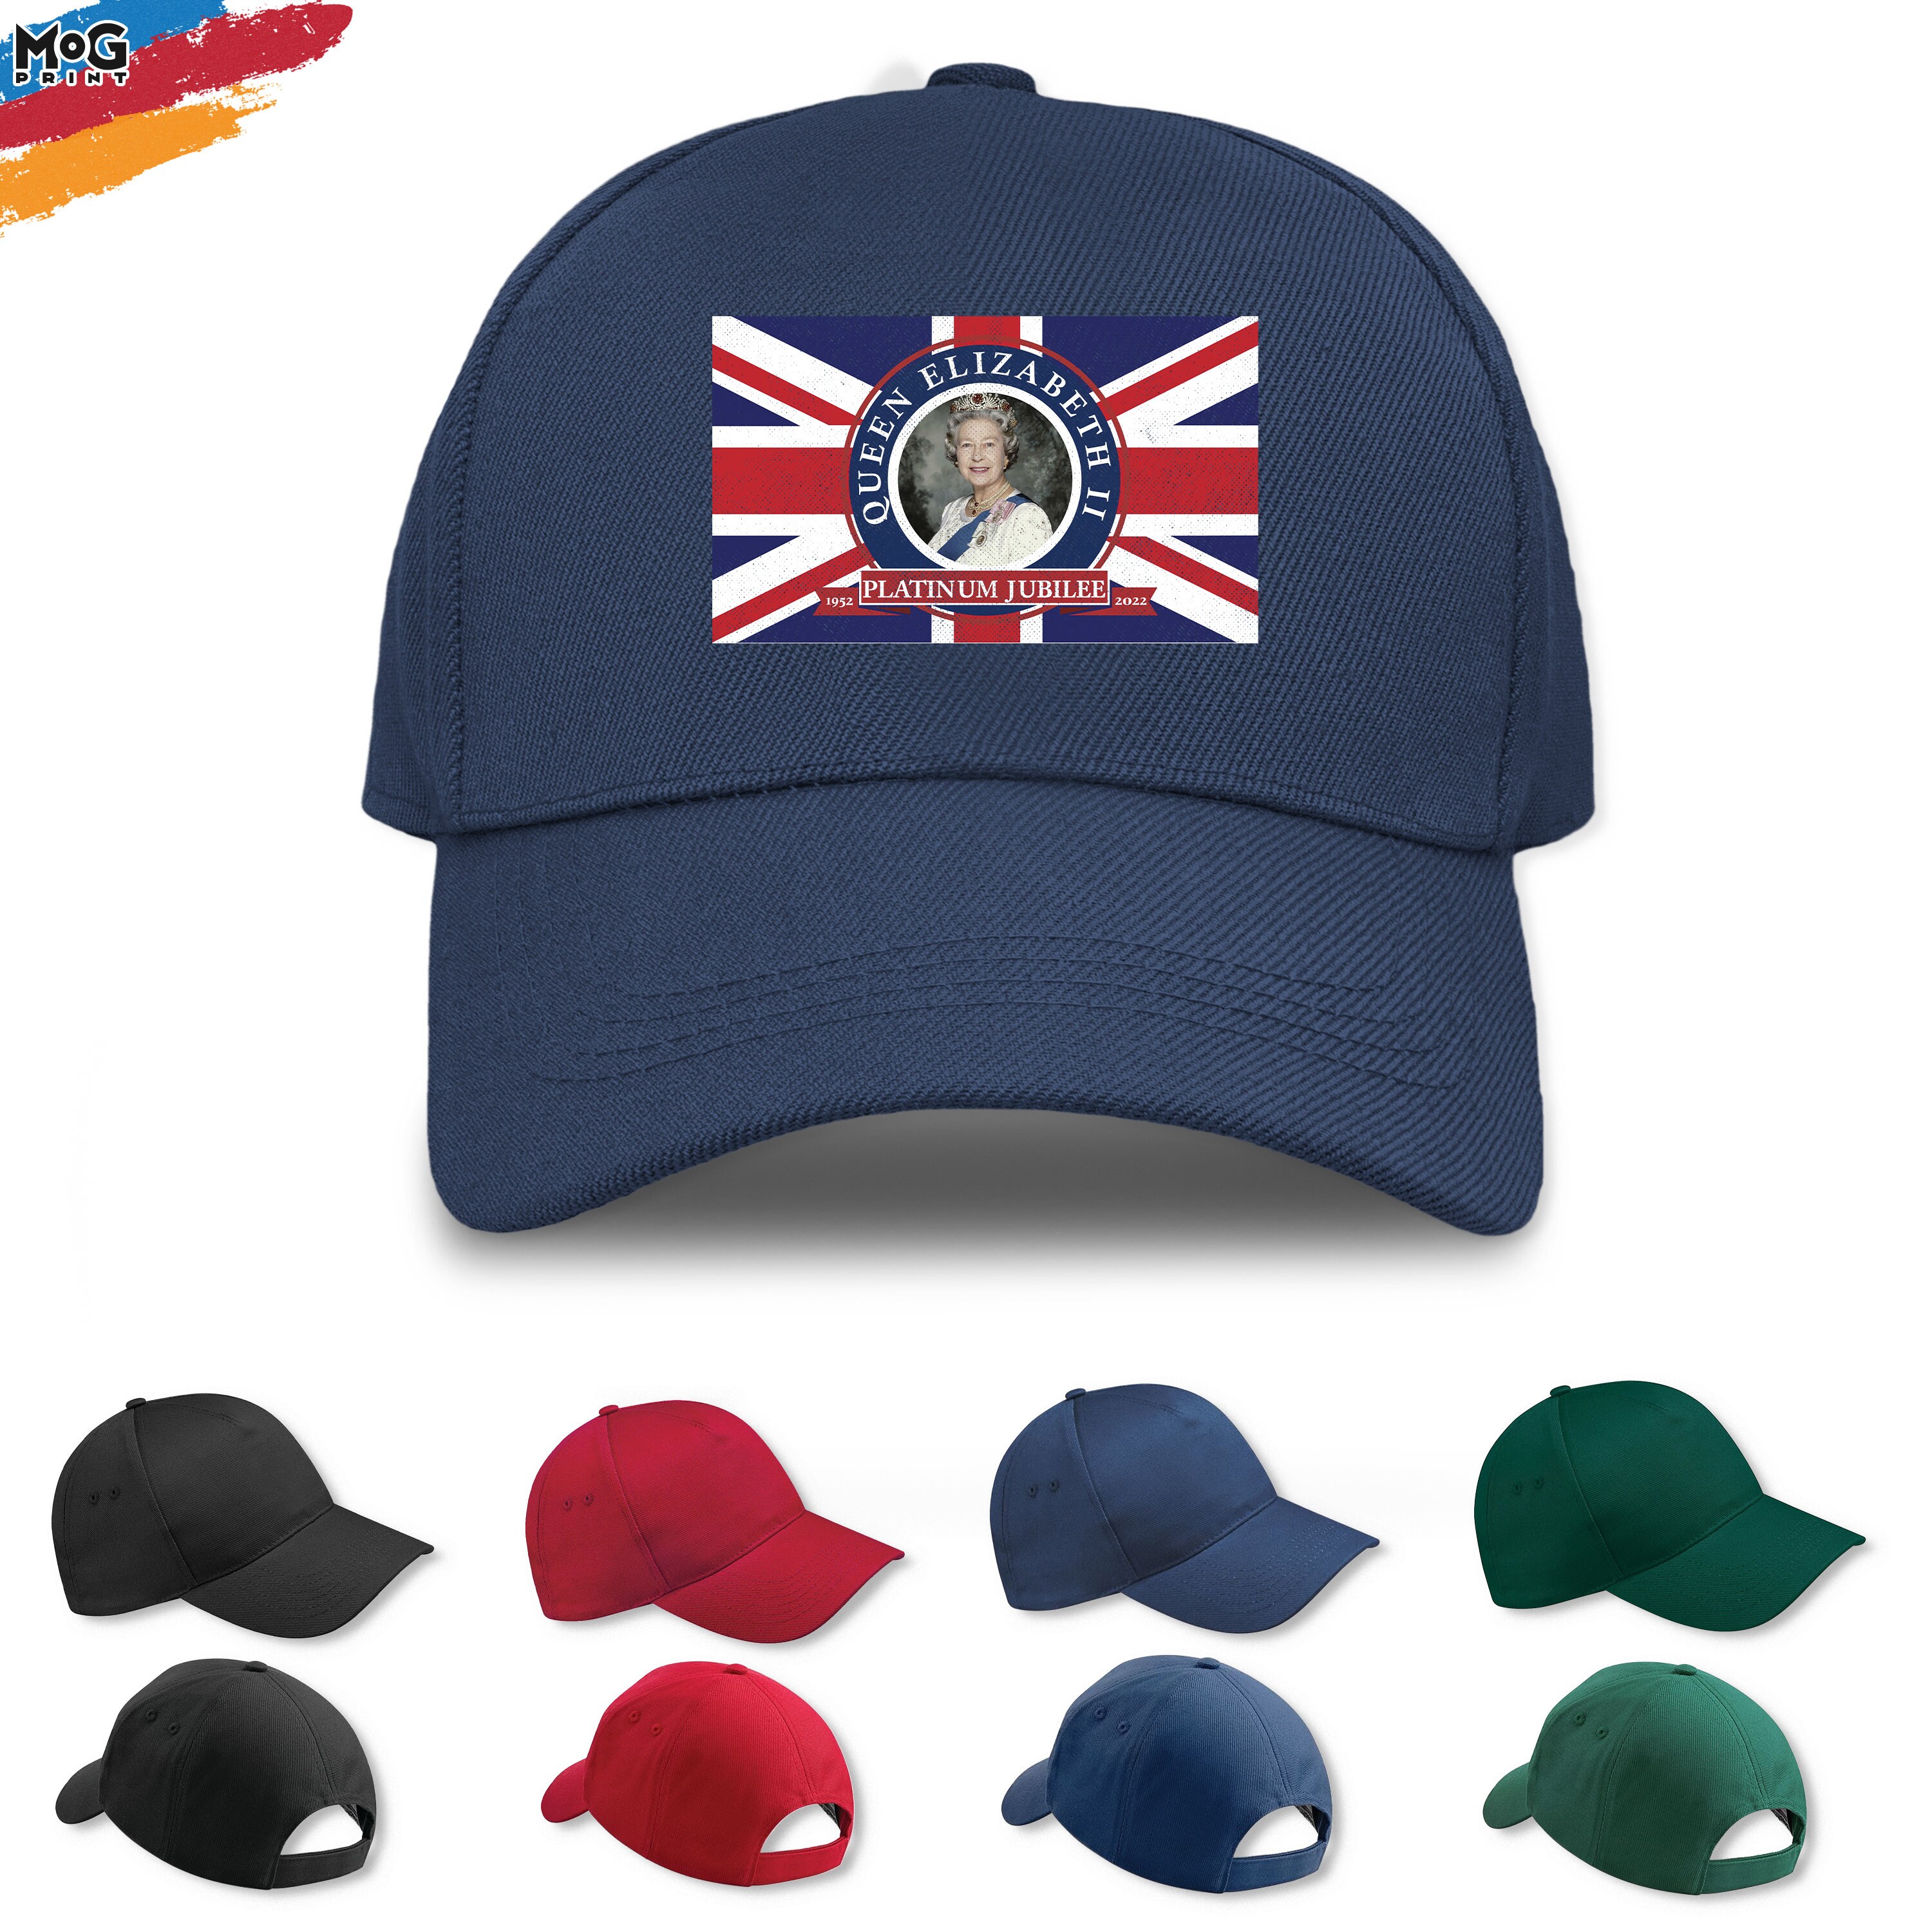 Discover Queen Elizabeth II Cap | Queens Platinum Jubilee 2022 Gifts | Union Jack Flag Print 70th Anniversary Event 1952 - 2022 70 Years | Unisex HAT